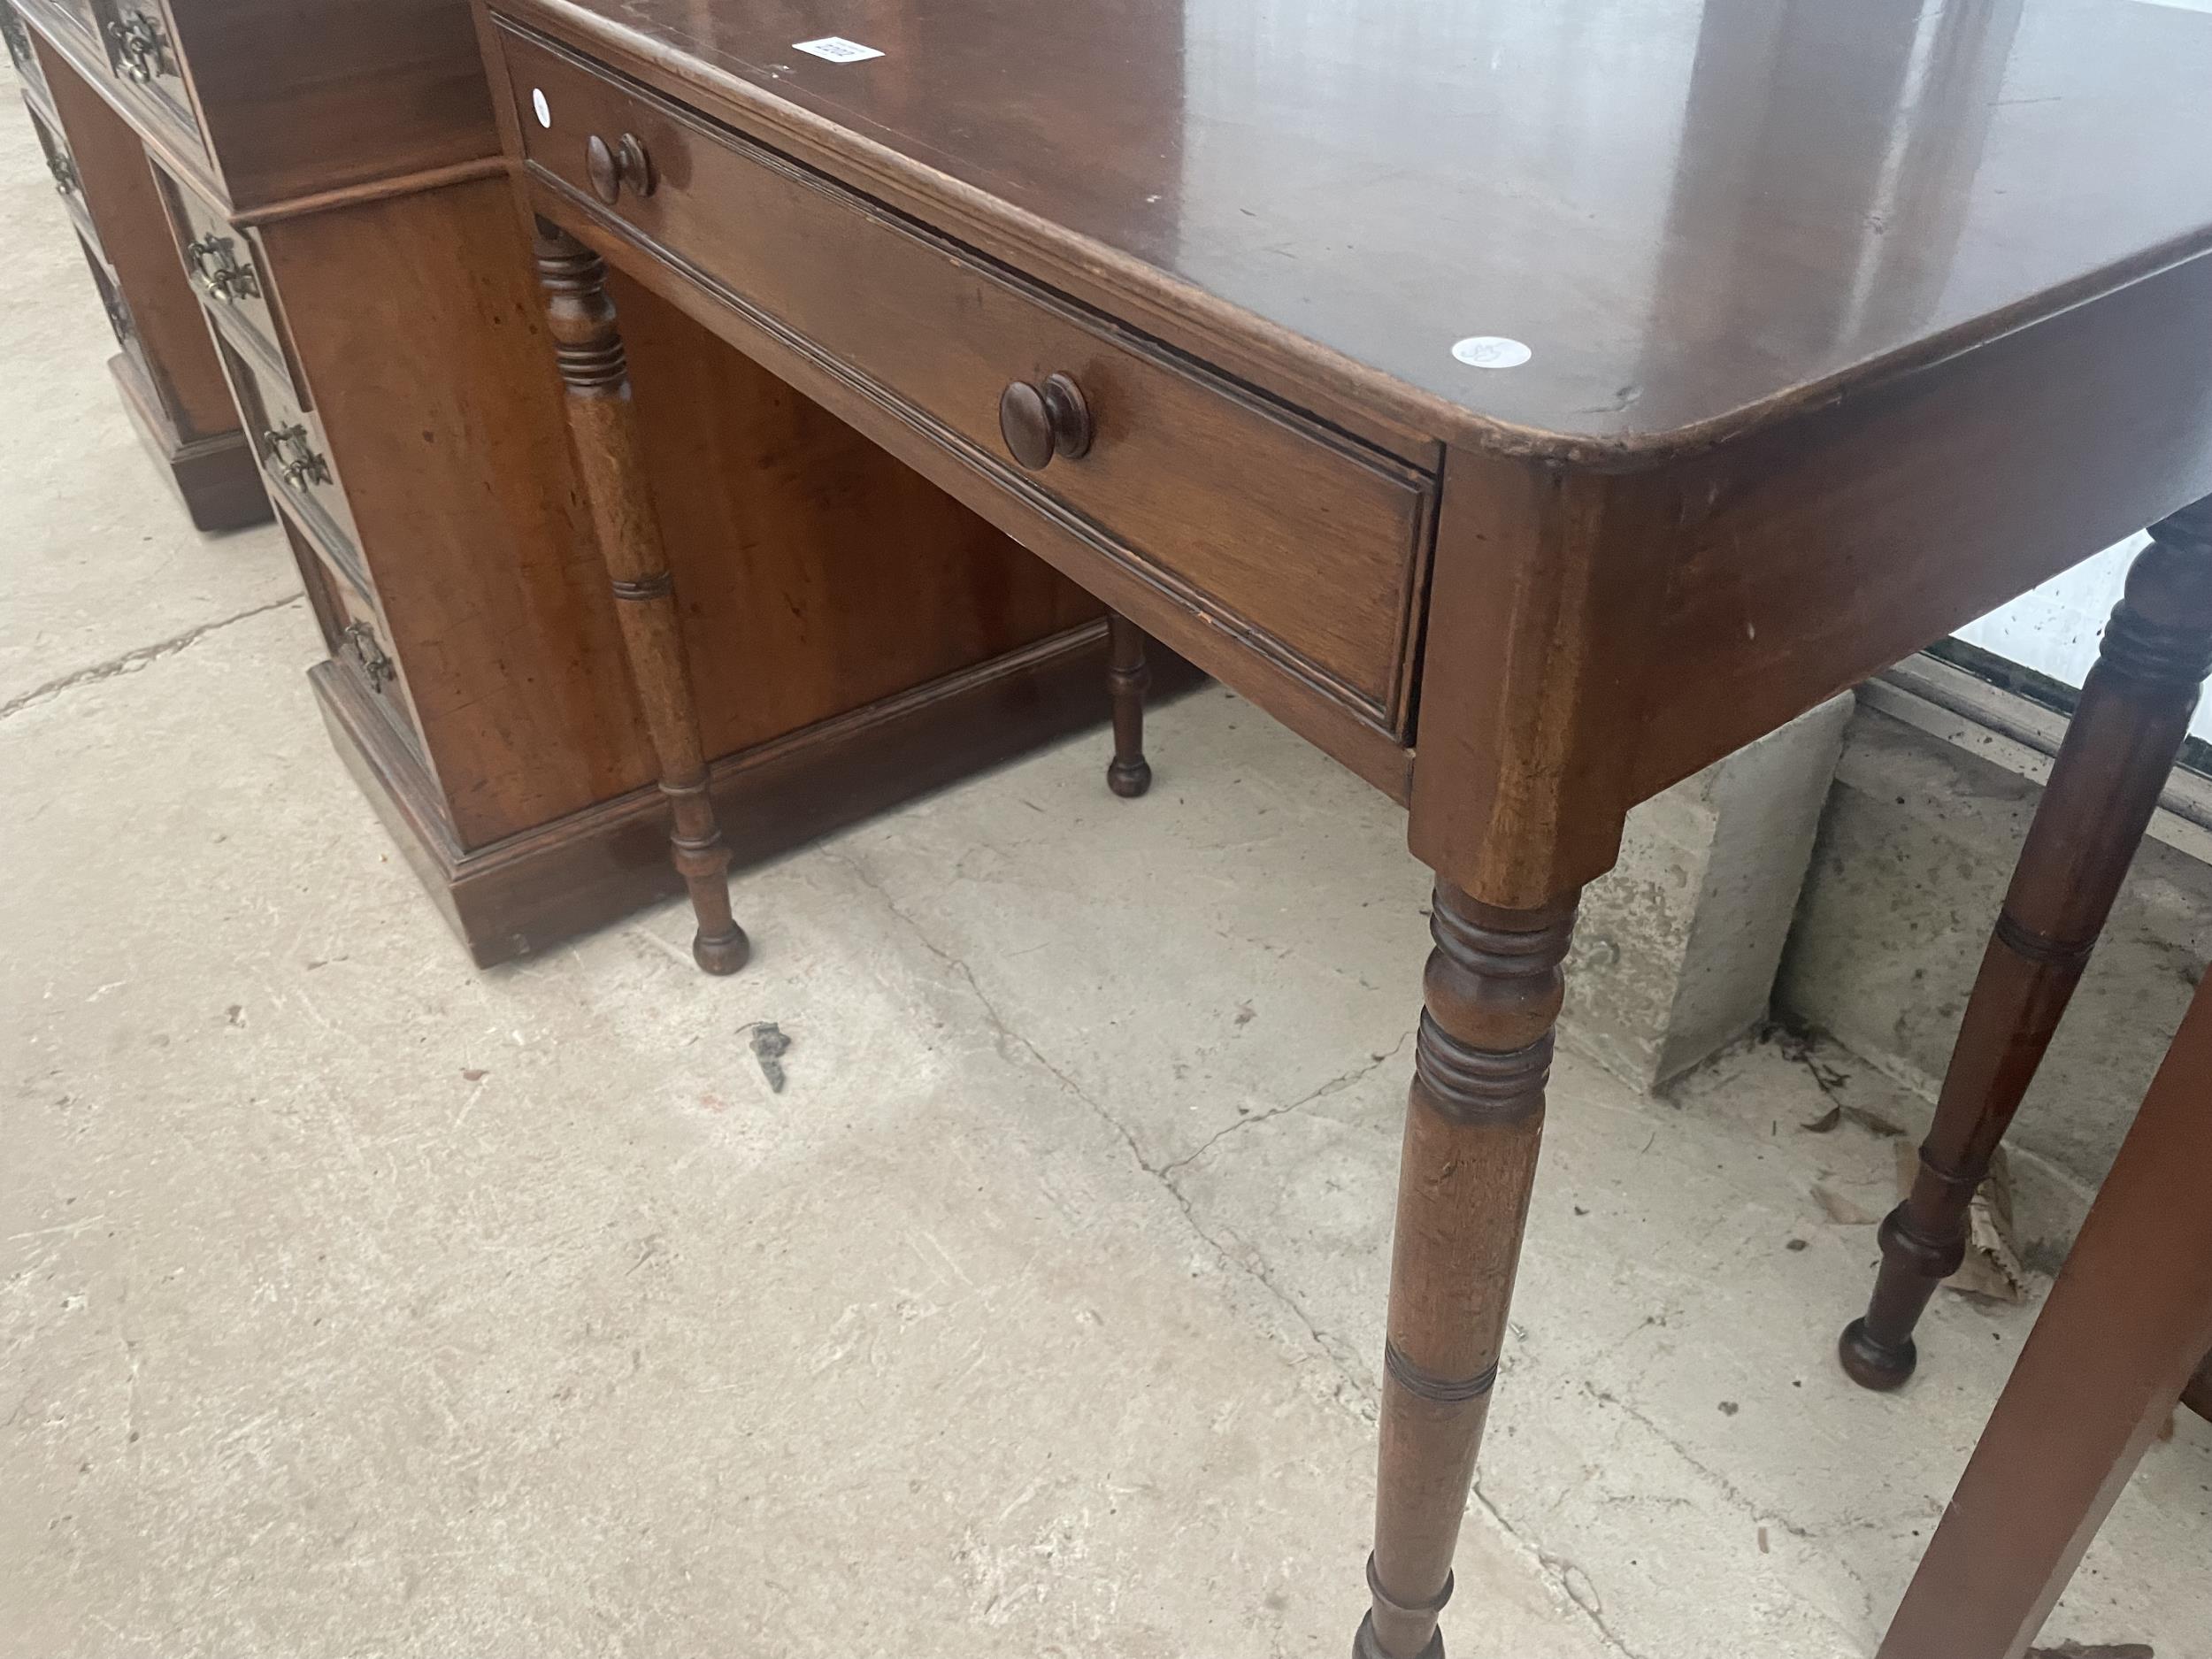 A 19TH CENTURY MAHOGANY SIDE TABLE WITH SINGLE DRAWER, ON TURNED LEGGS, 33.5" WIDE - Image 4 of 4